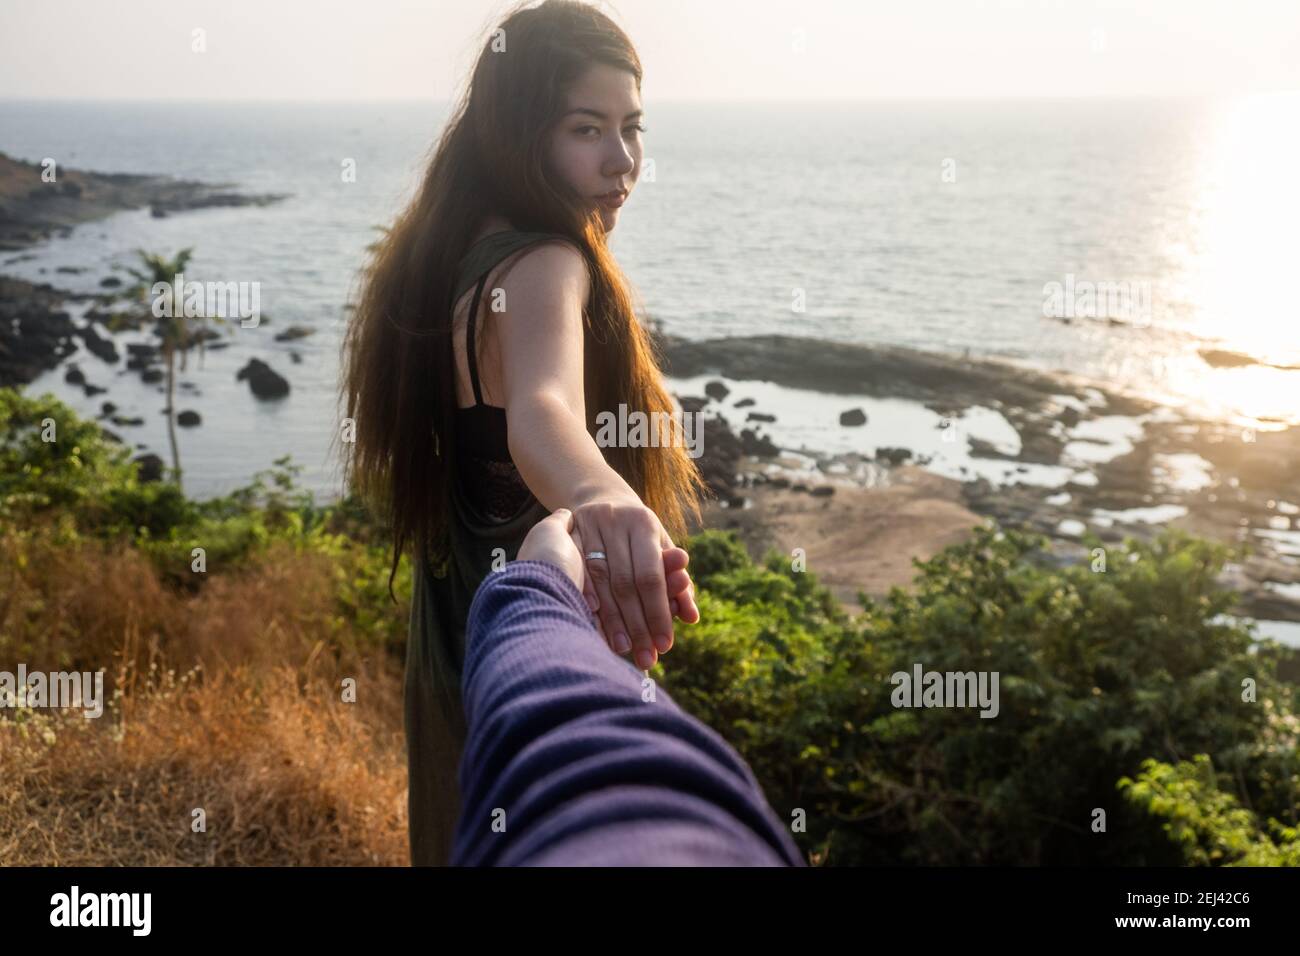 Shot of a young woman leading someone by the hand at the beach Stock Photo